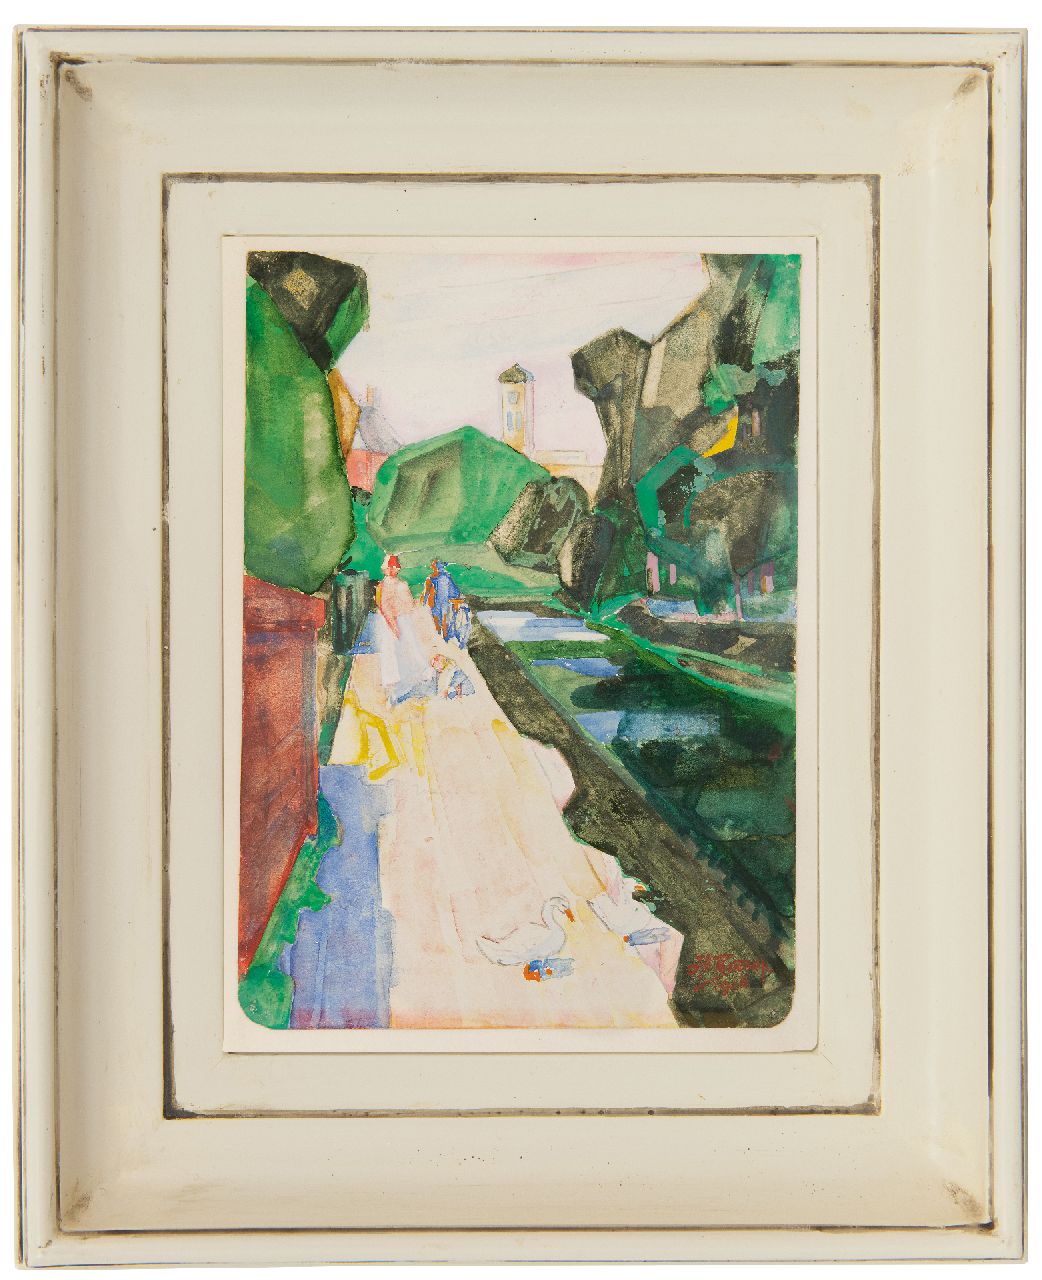 Toorop J.Th.  | Johannes Theodorus 'Jan' Toorop | Watercolours and drawings offered for sale | Figures in a park, pencil and watercolour on paper 21.5 x 15.5 cm, signed l.r. and dated 1926